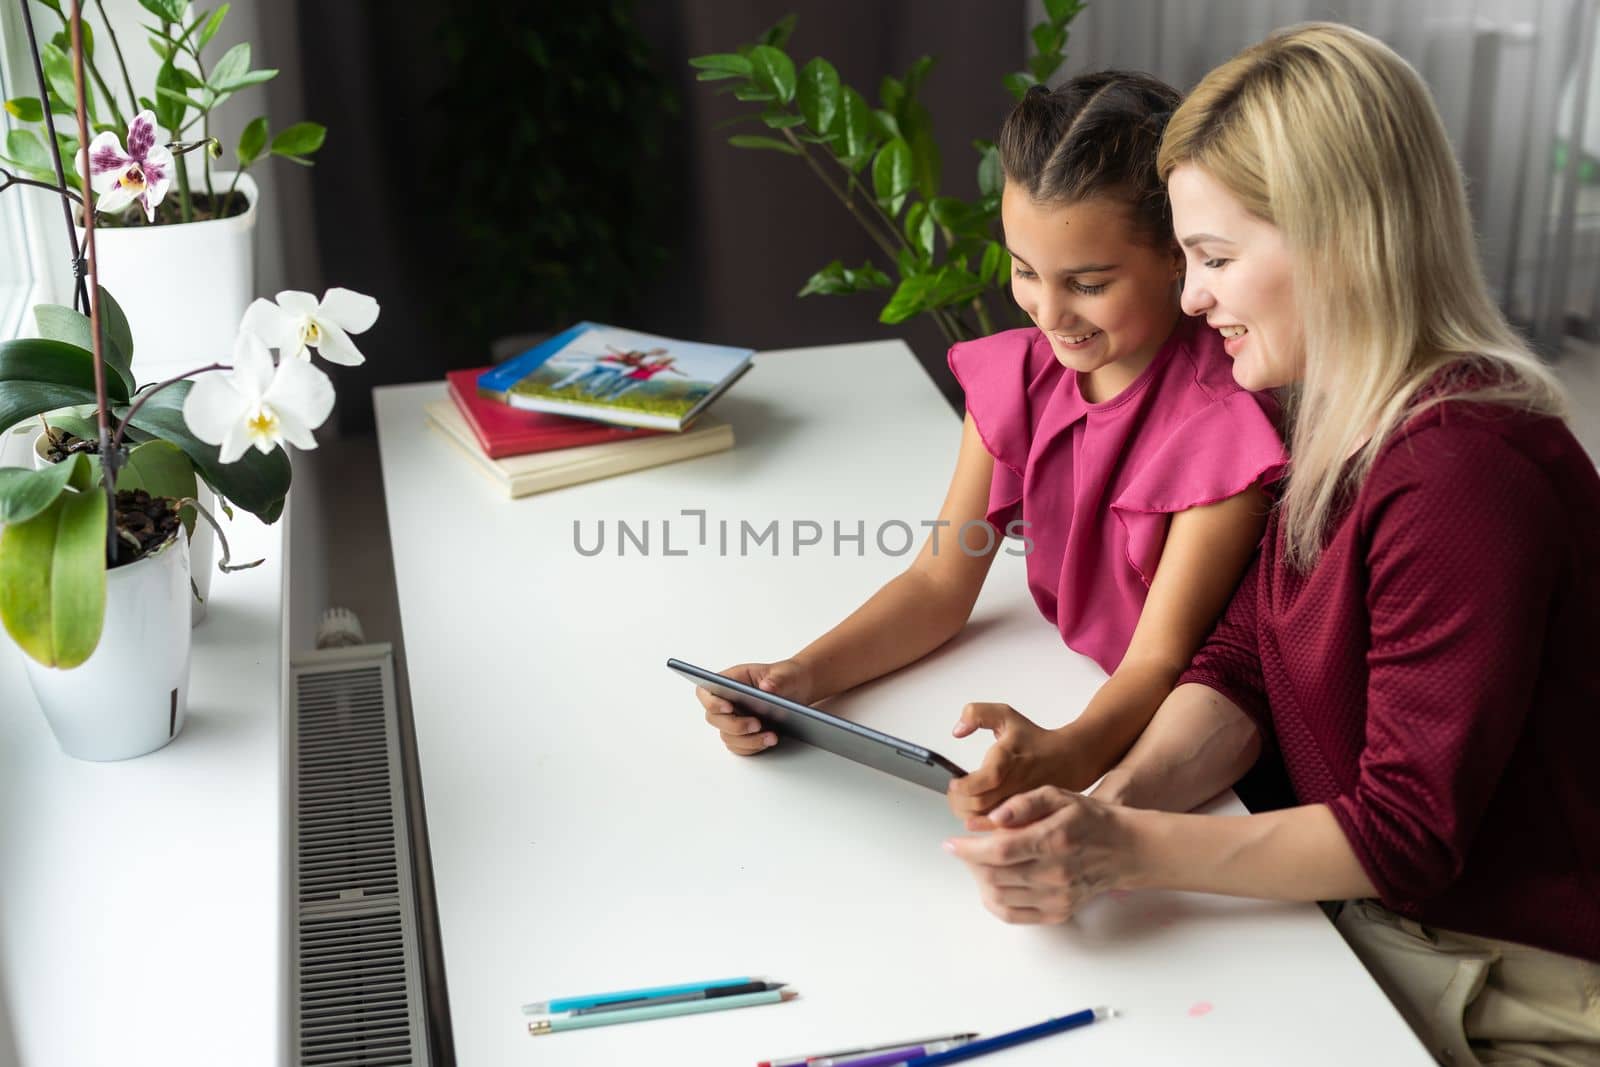 Mom with her tween daughter using tablet together